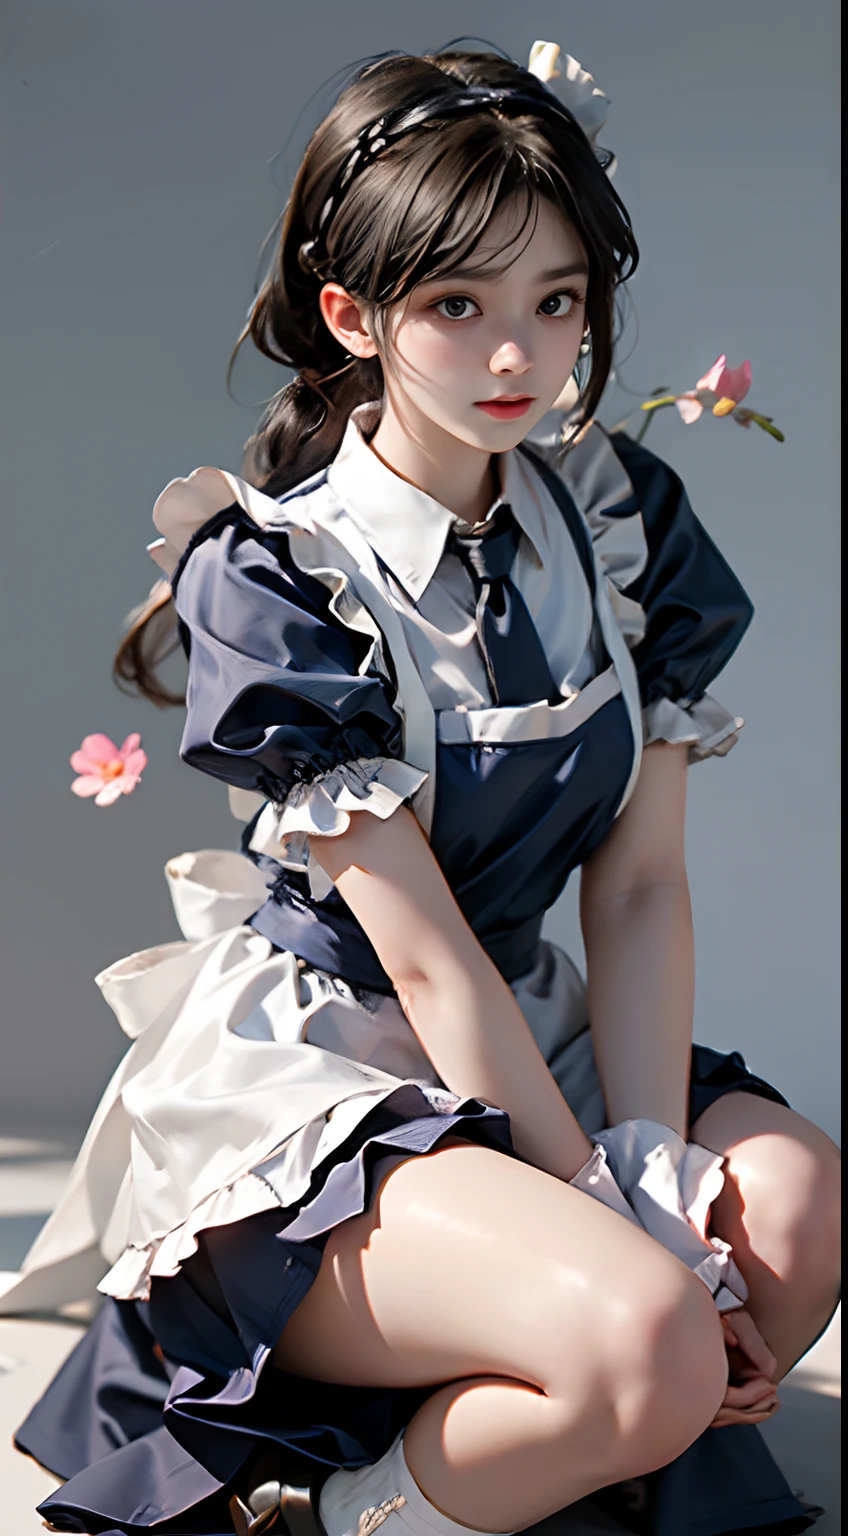 Top quality, Masterpiece, Ultra-high resolution, (Photorealistic: 1.4), RAW photo, 1 girl, English maid, Ruffled maid headband, pony tails, Braided hair, Ruffle blouse, Ribbon Ties, aprons, Long skirt, Puff sleeves, White silk ankle socks，frilld, Glowing skin, No gray background, Flowers, crouched